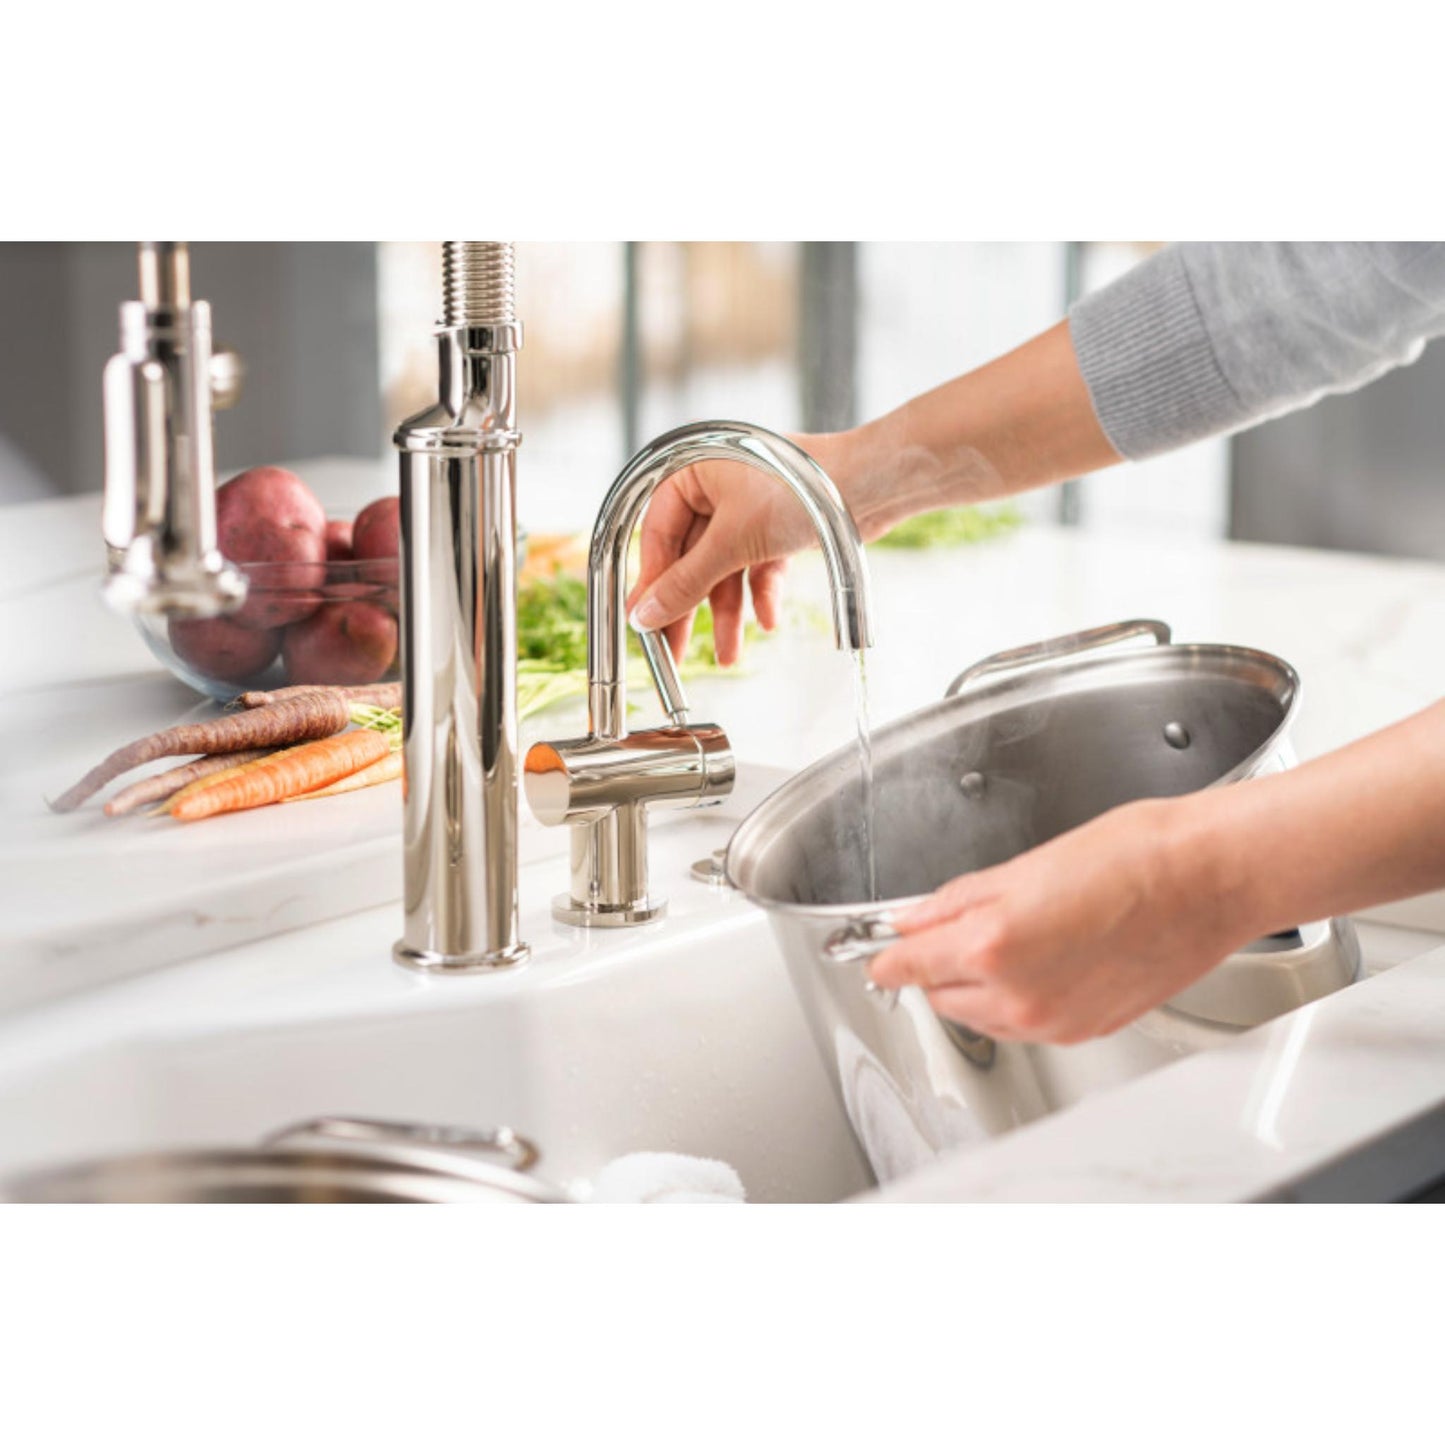 InSinkerErator HC3300 Instant Steaming Hot & Filtered Cold Tap Chrome, dispensing instant hot water, lifestyle  image in all white kitchen